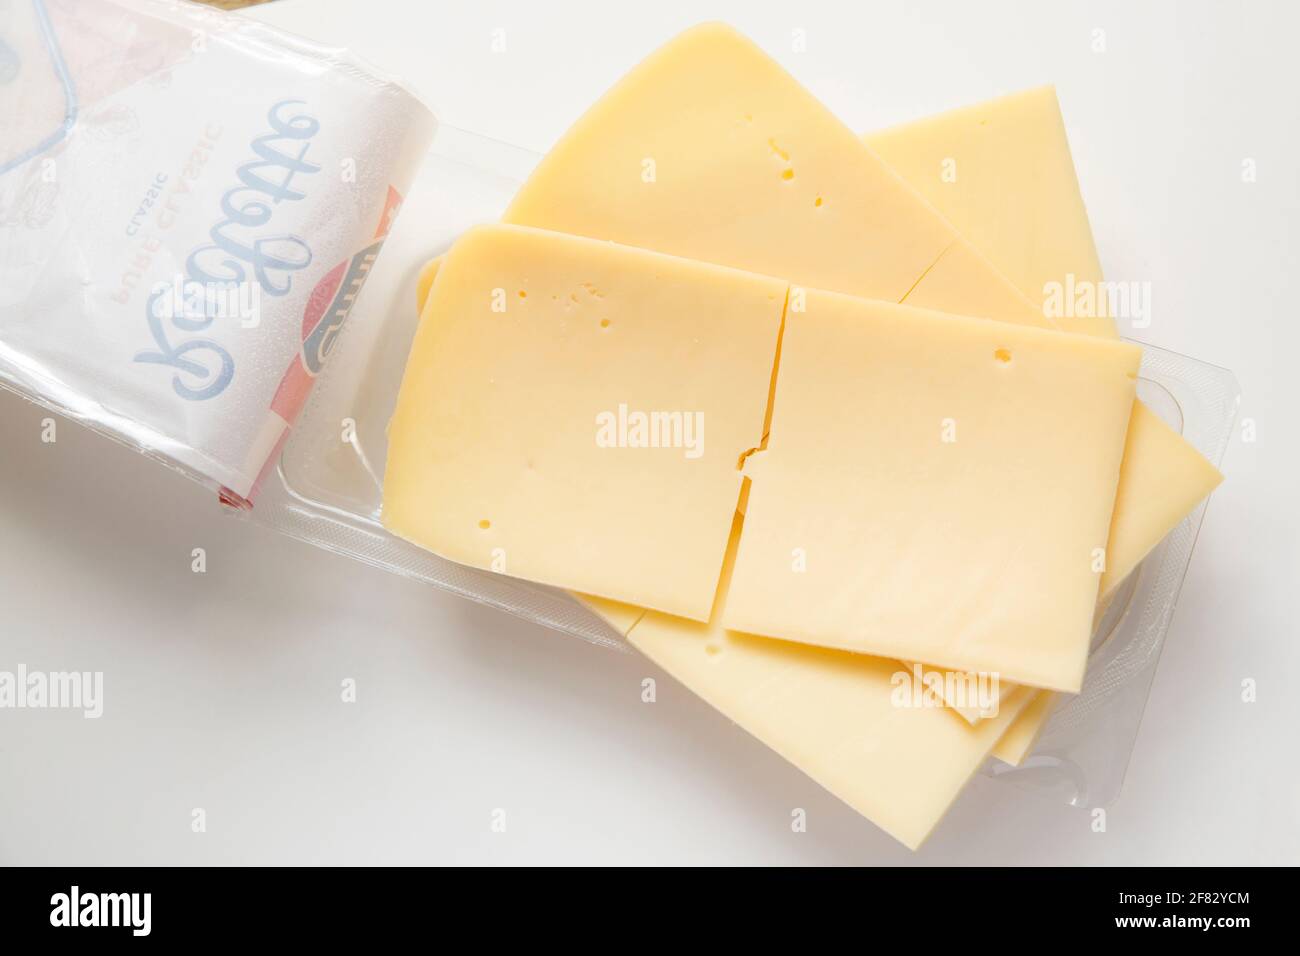 Sliced Emmi Raclette cheese bought from a supermarket in the UK. England UK GB Stock Photo